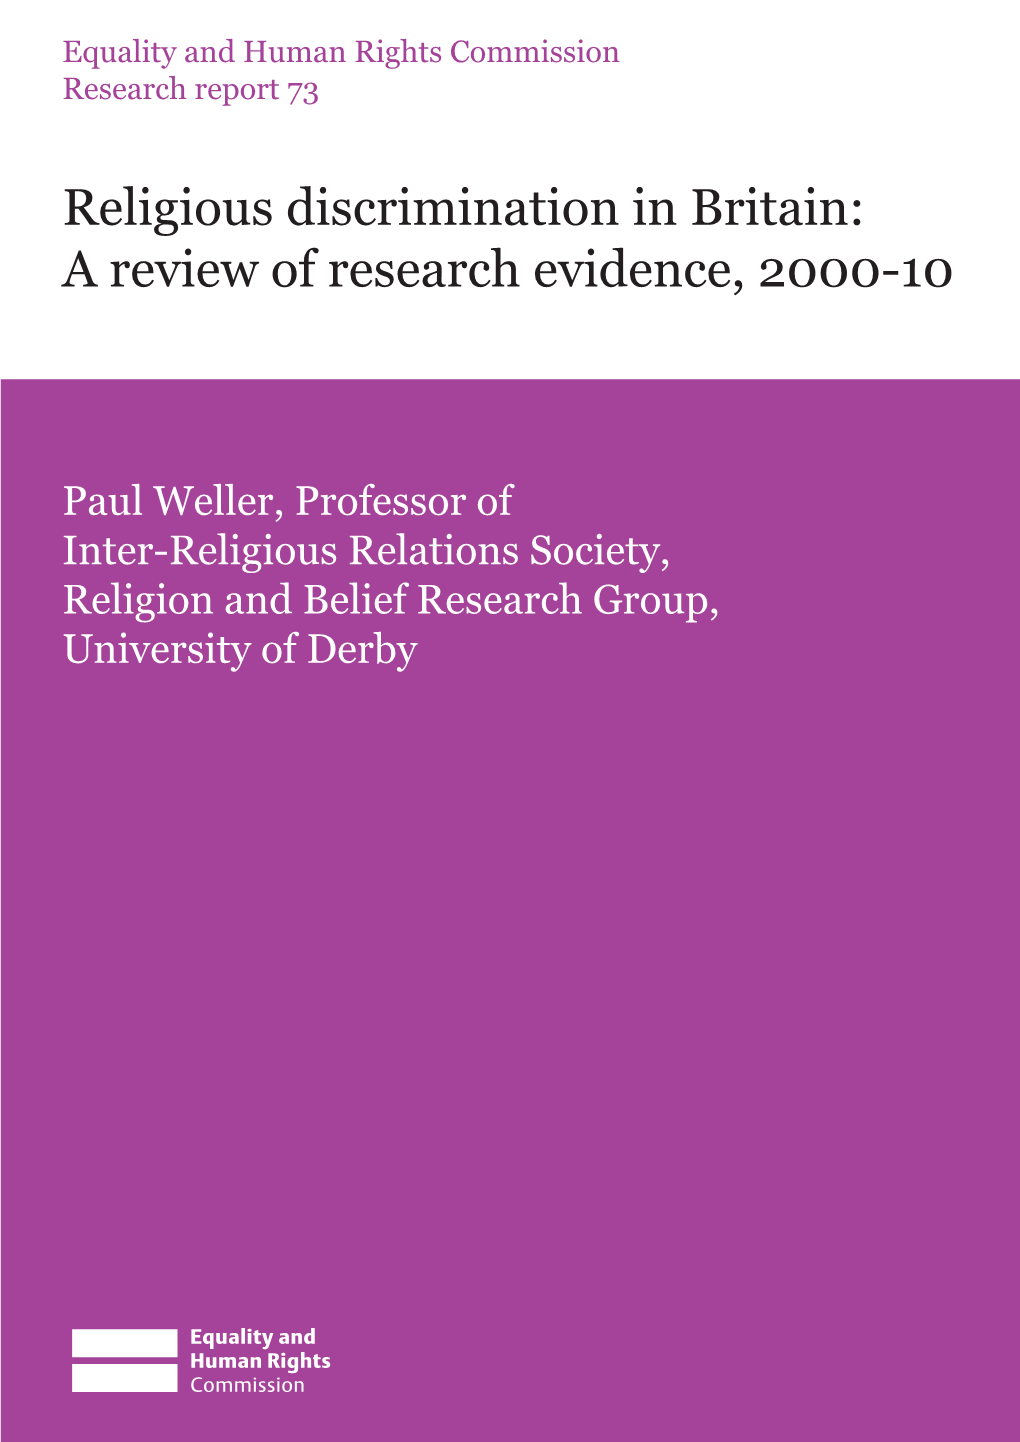 Religious Discrimination in Britain: a Review of Research Evidence, 2000-10